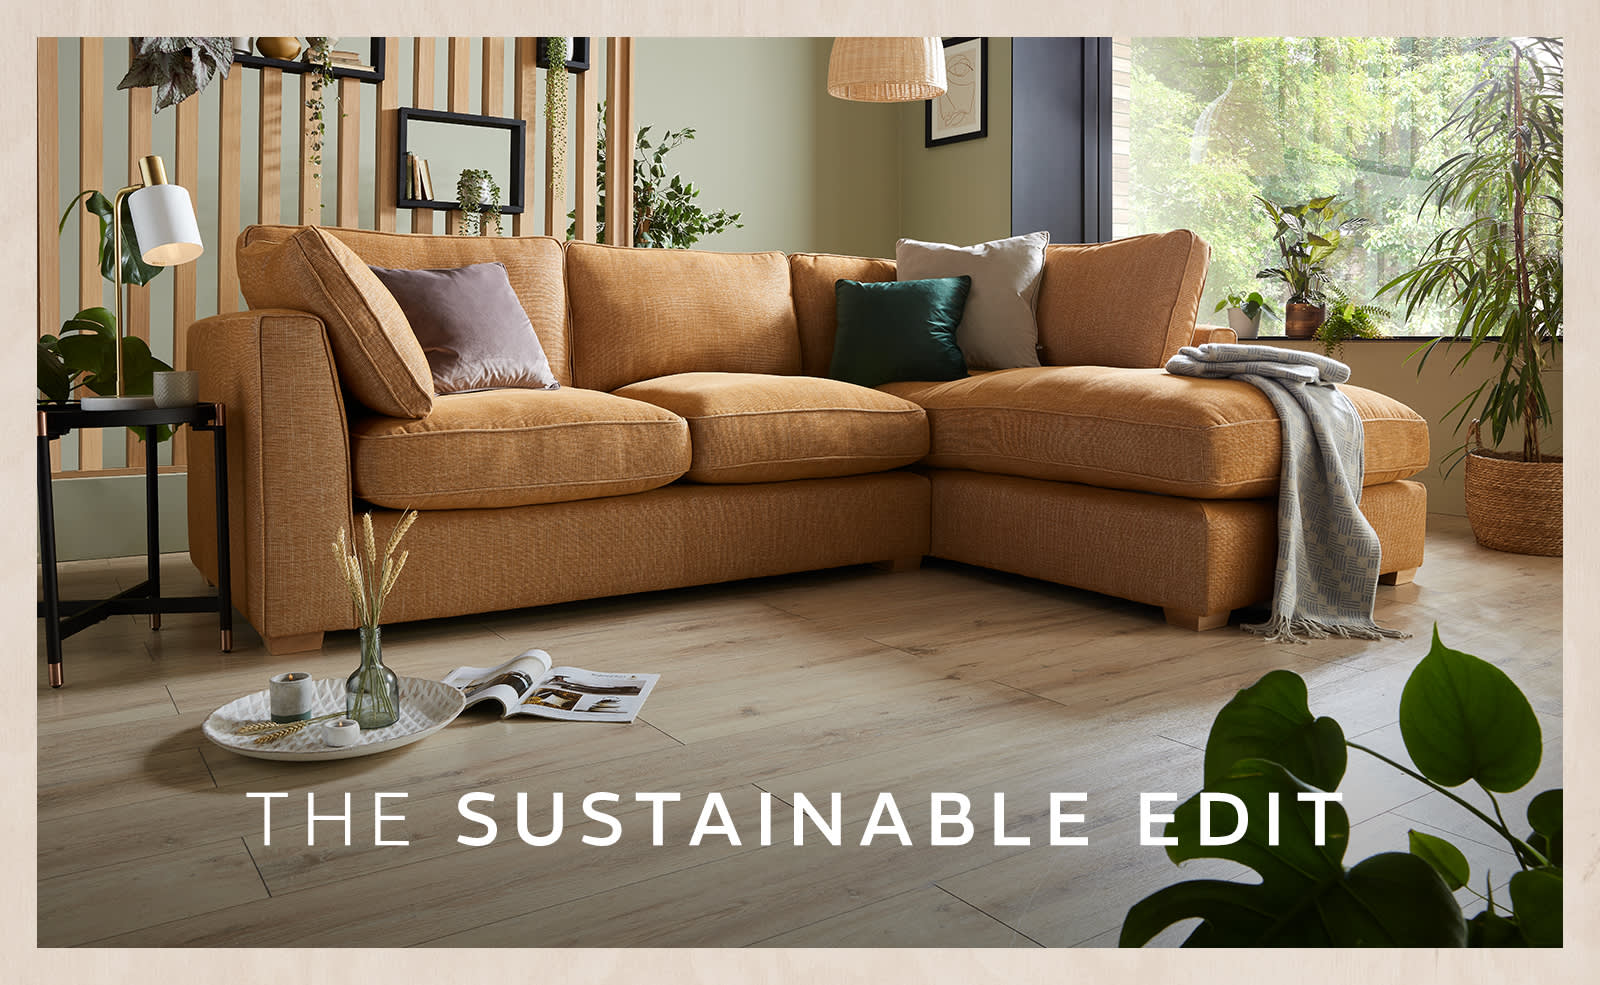 The Sustainable Edit